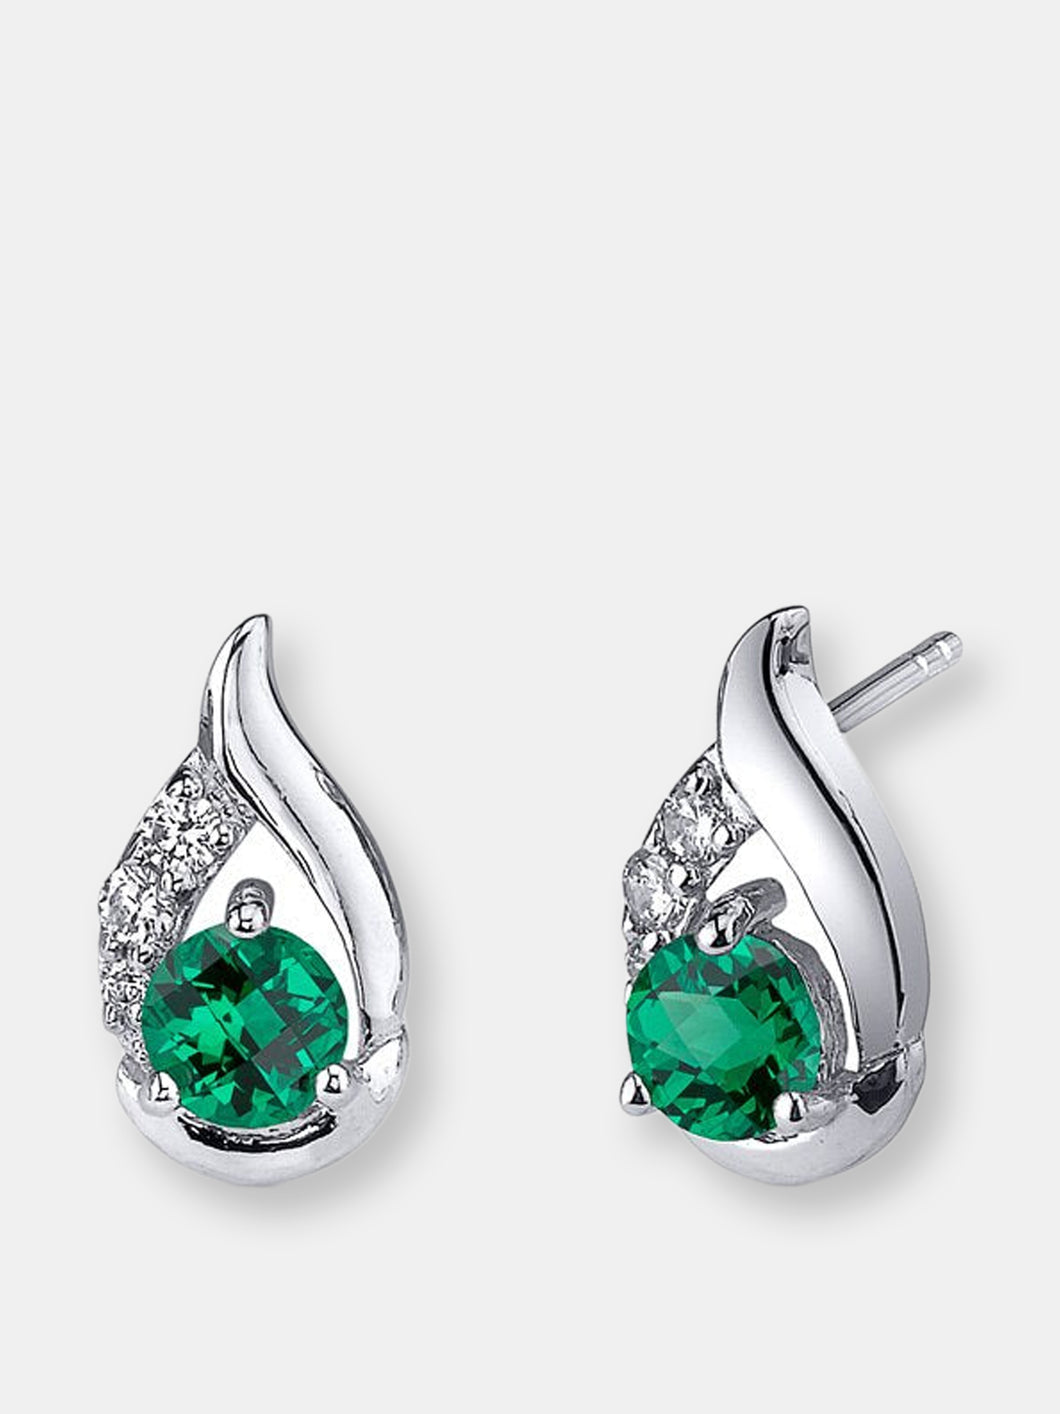 Emerald Earrings Sterling Silver Round Shape 1 Carats